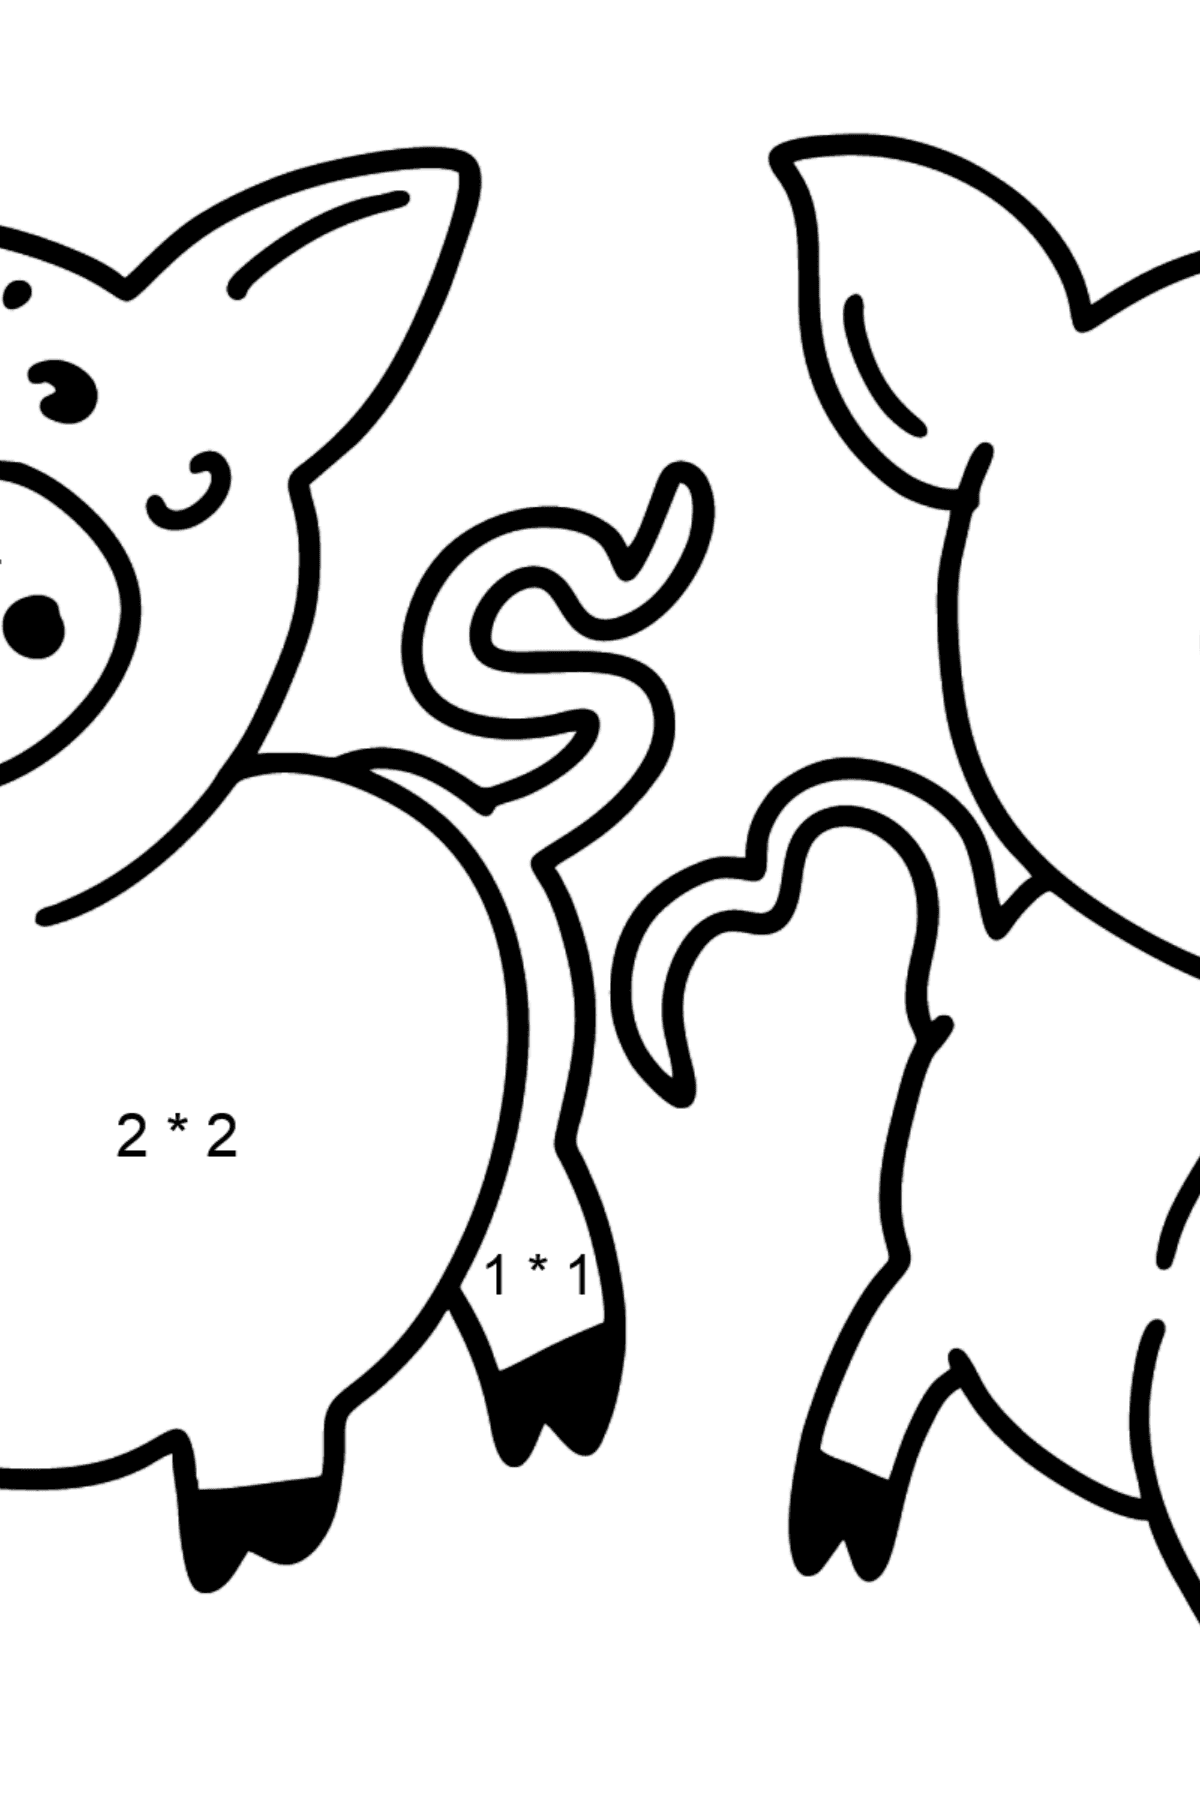 Piglets coloring page - Math Coloring - Multiplication for Kids